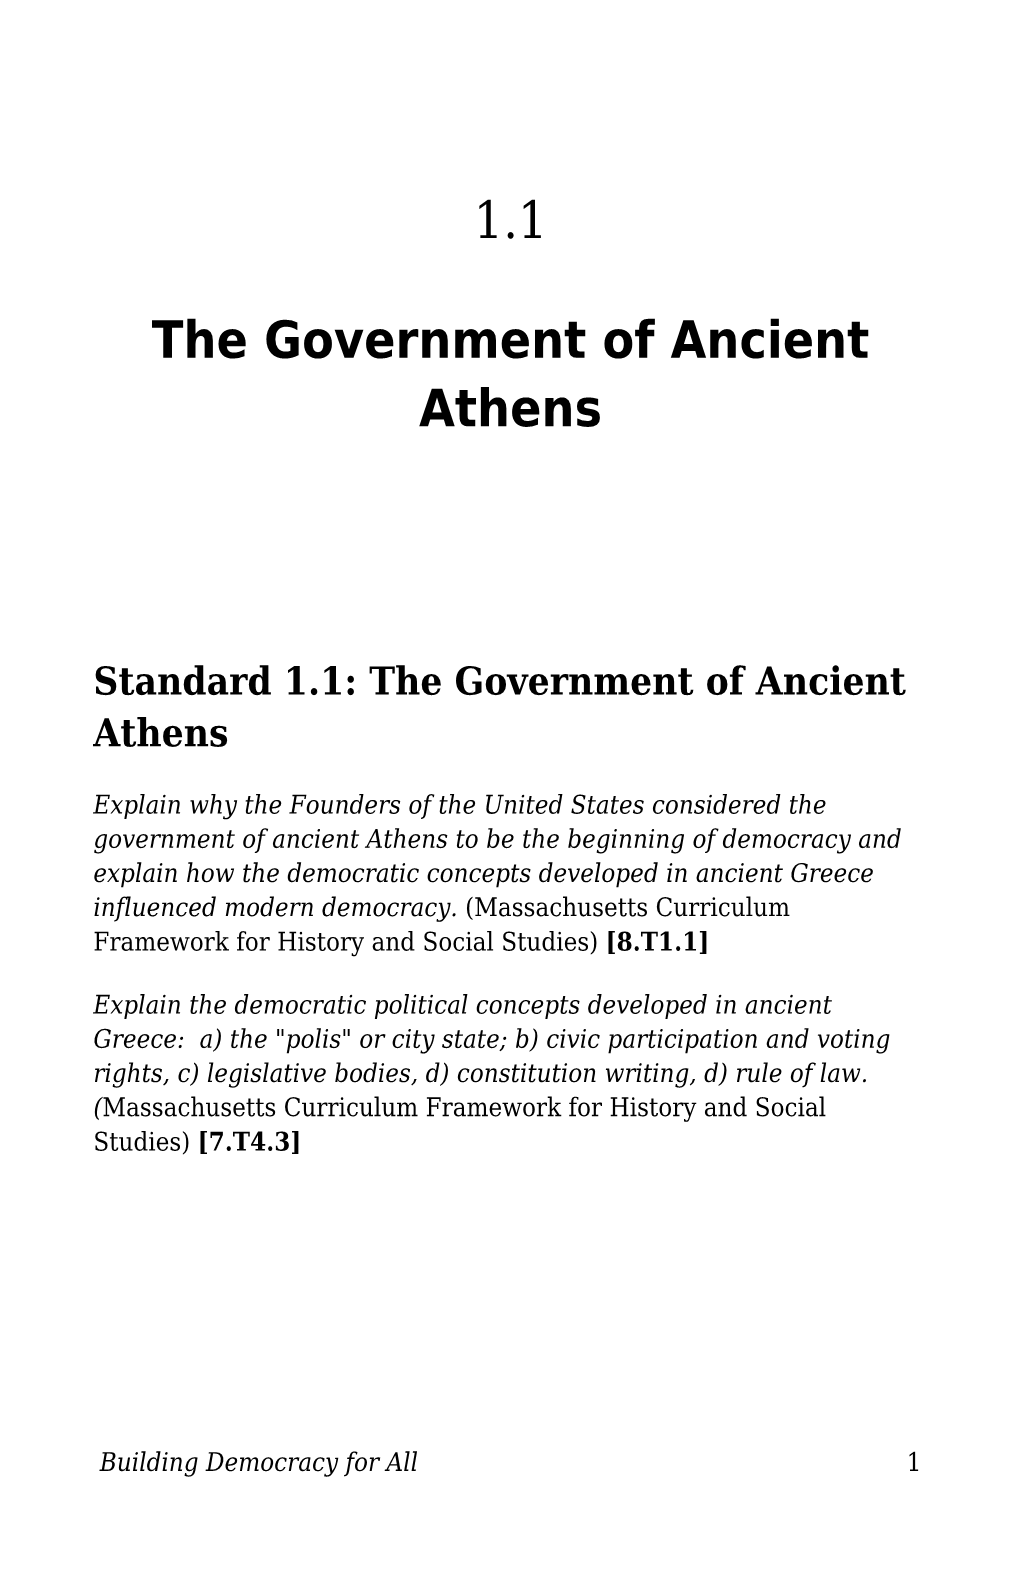 1.1 the Government of Ancient Athens